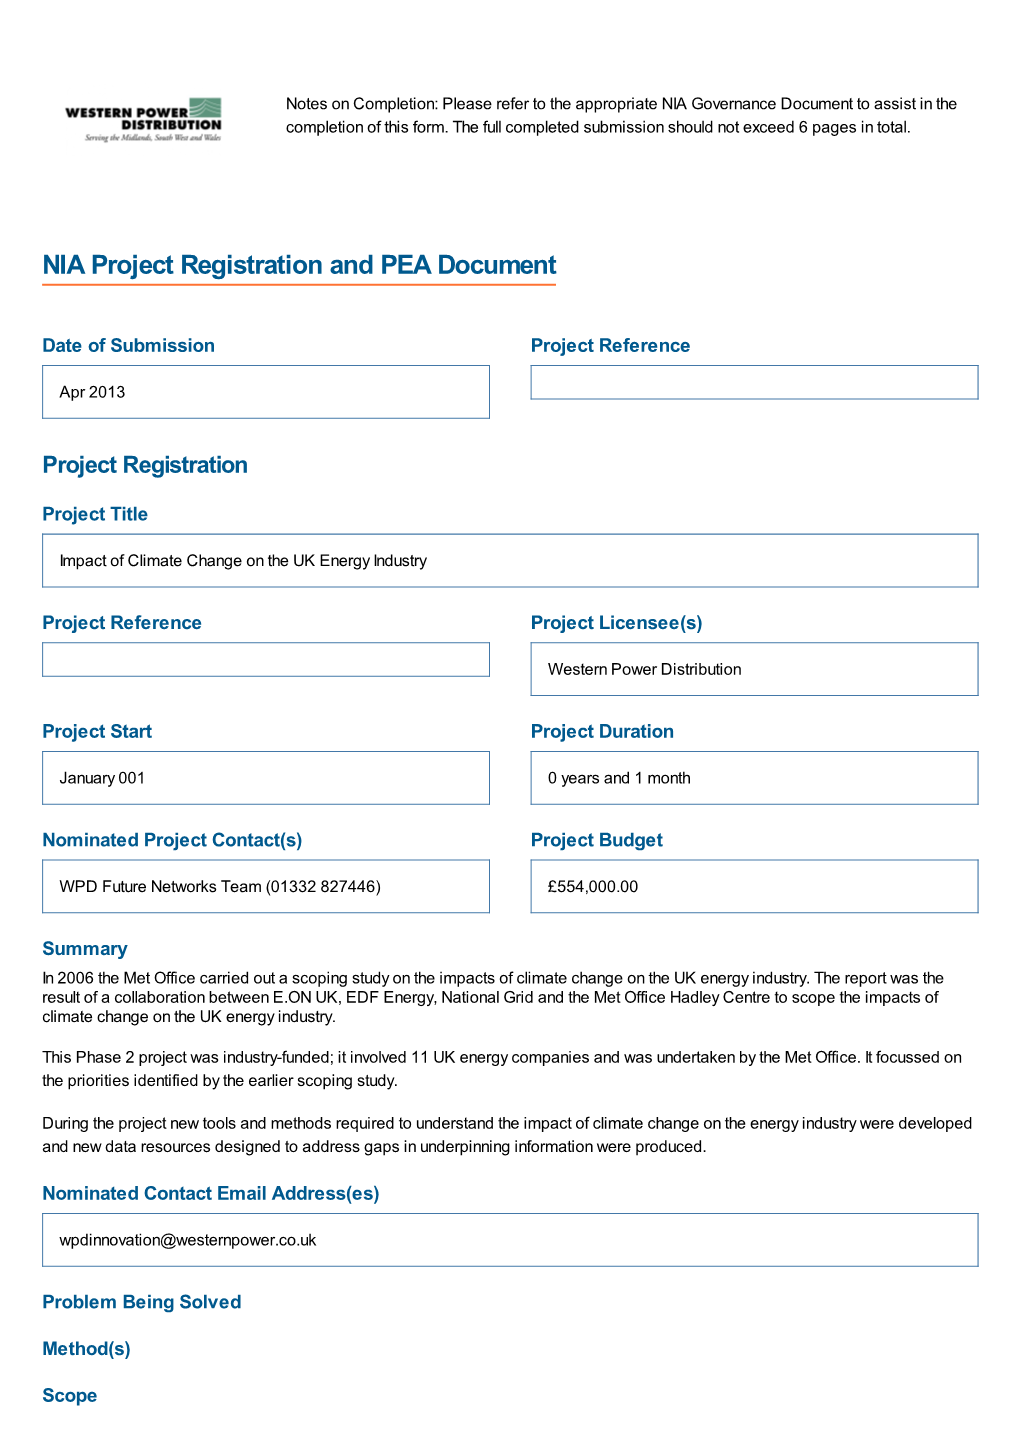 NIA Project Registration and PEA Document